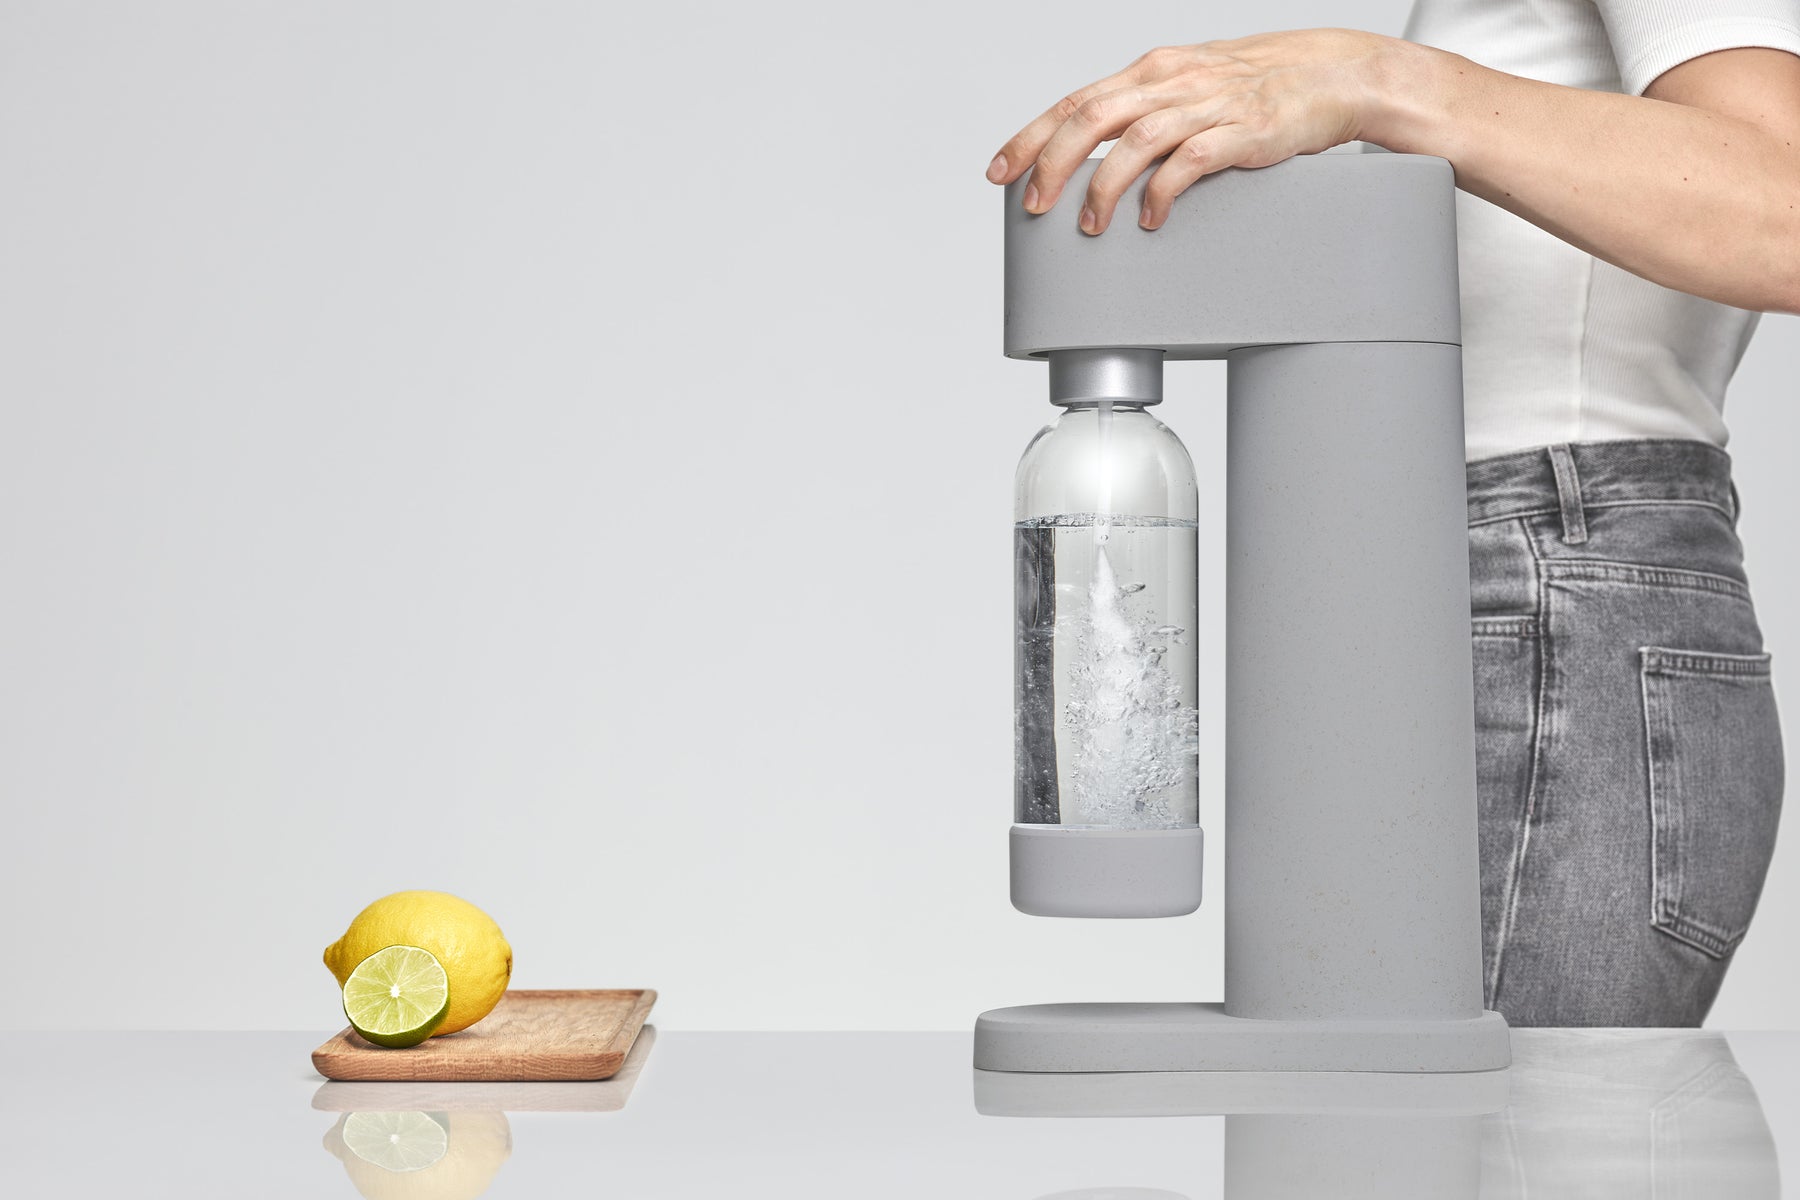  Mysoda Woody Sparkling Water Maker - Silent Carbonated